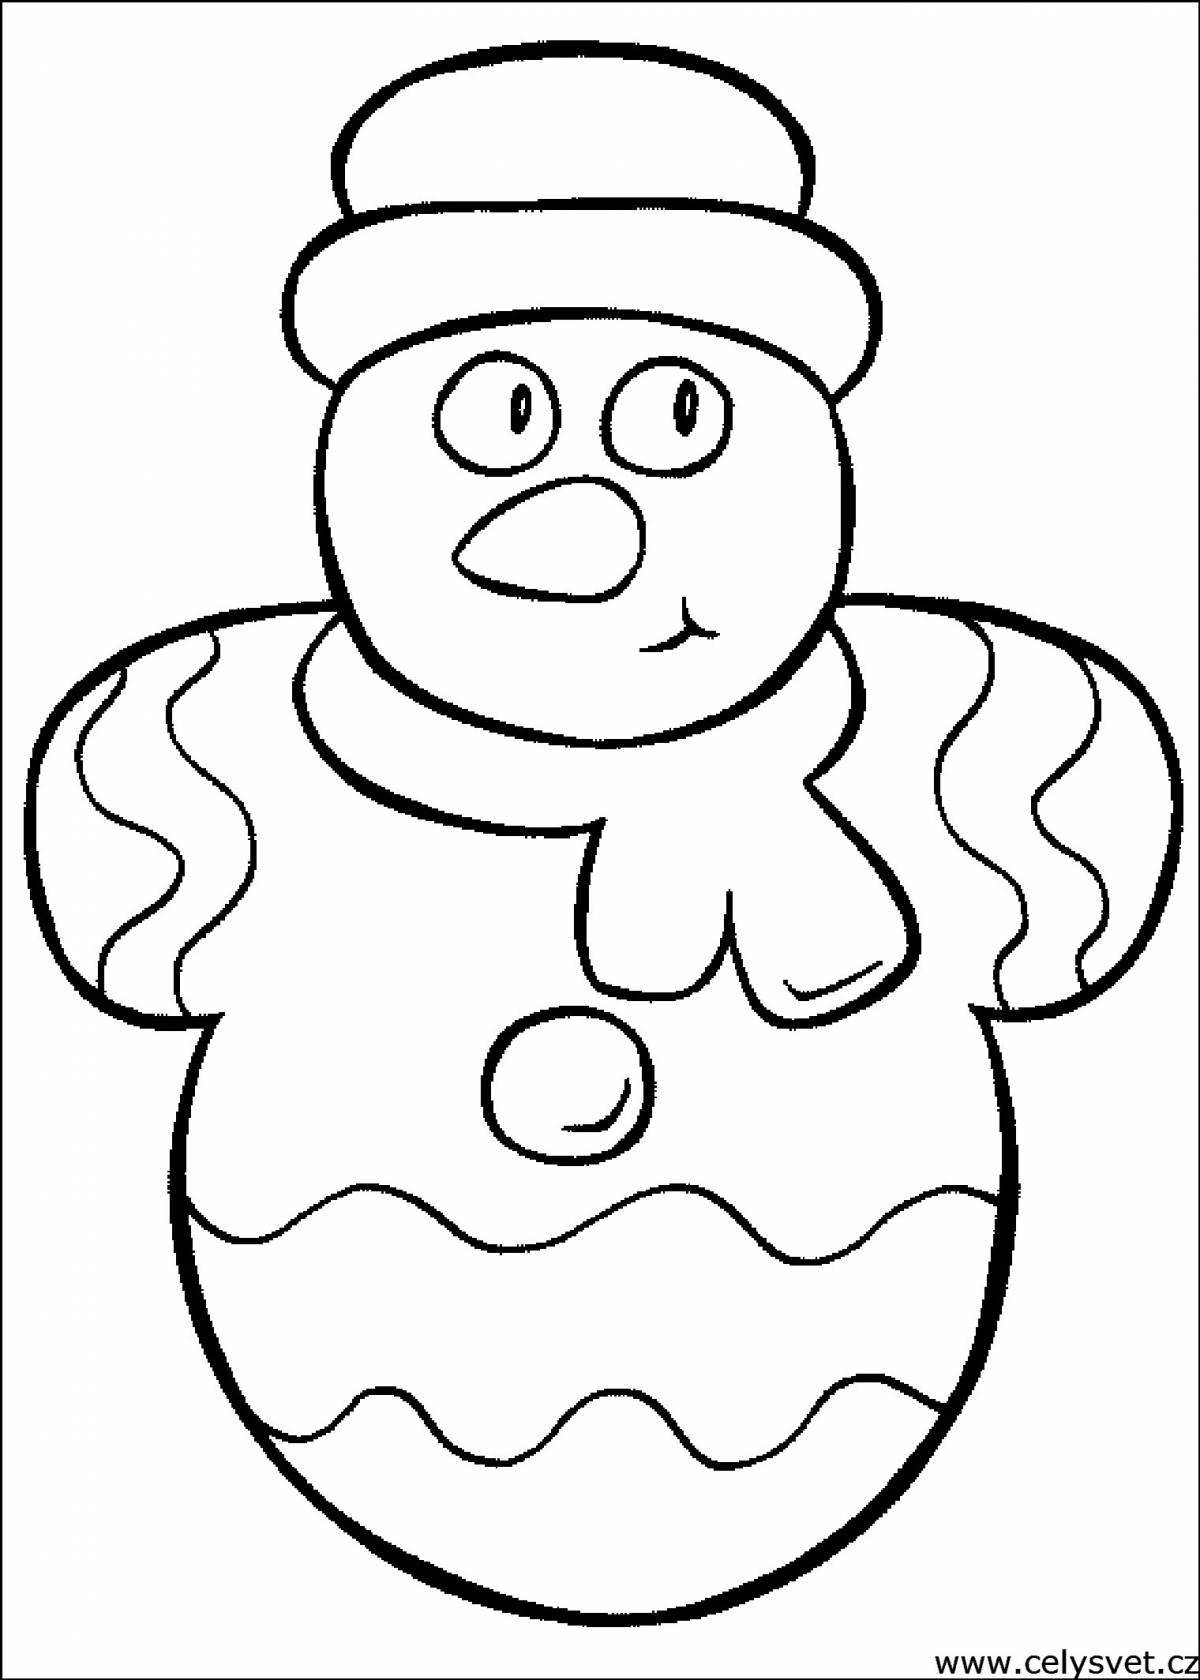 Merry Christmas coloring book for preschoolers